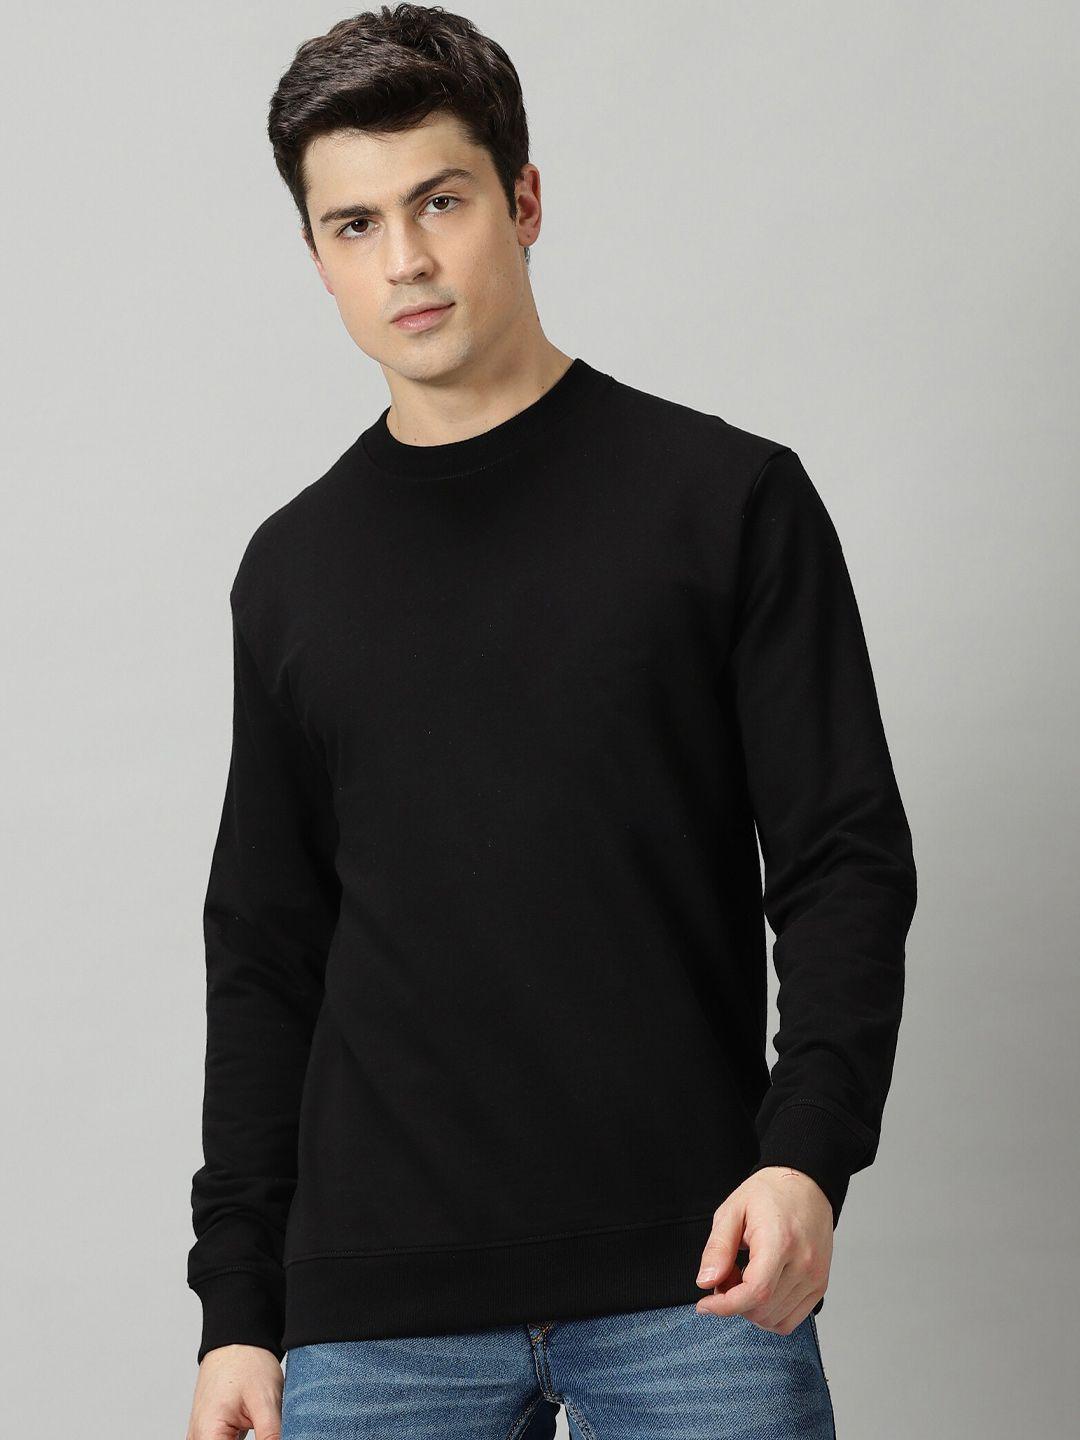 the hollander  round neck long sleeves pure cotton t-shirt